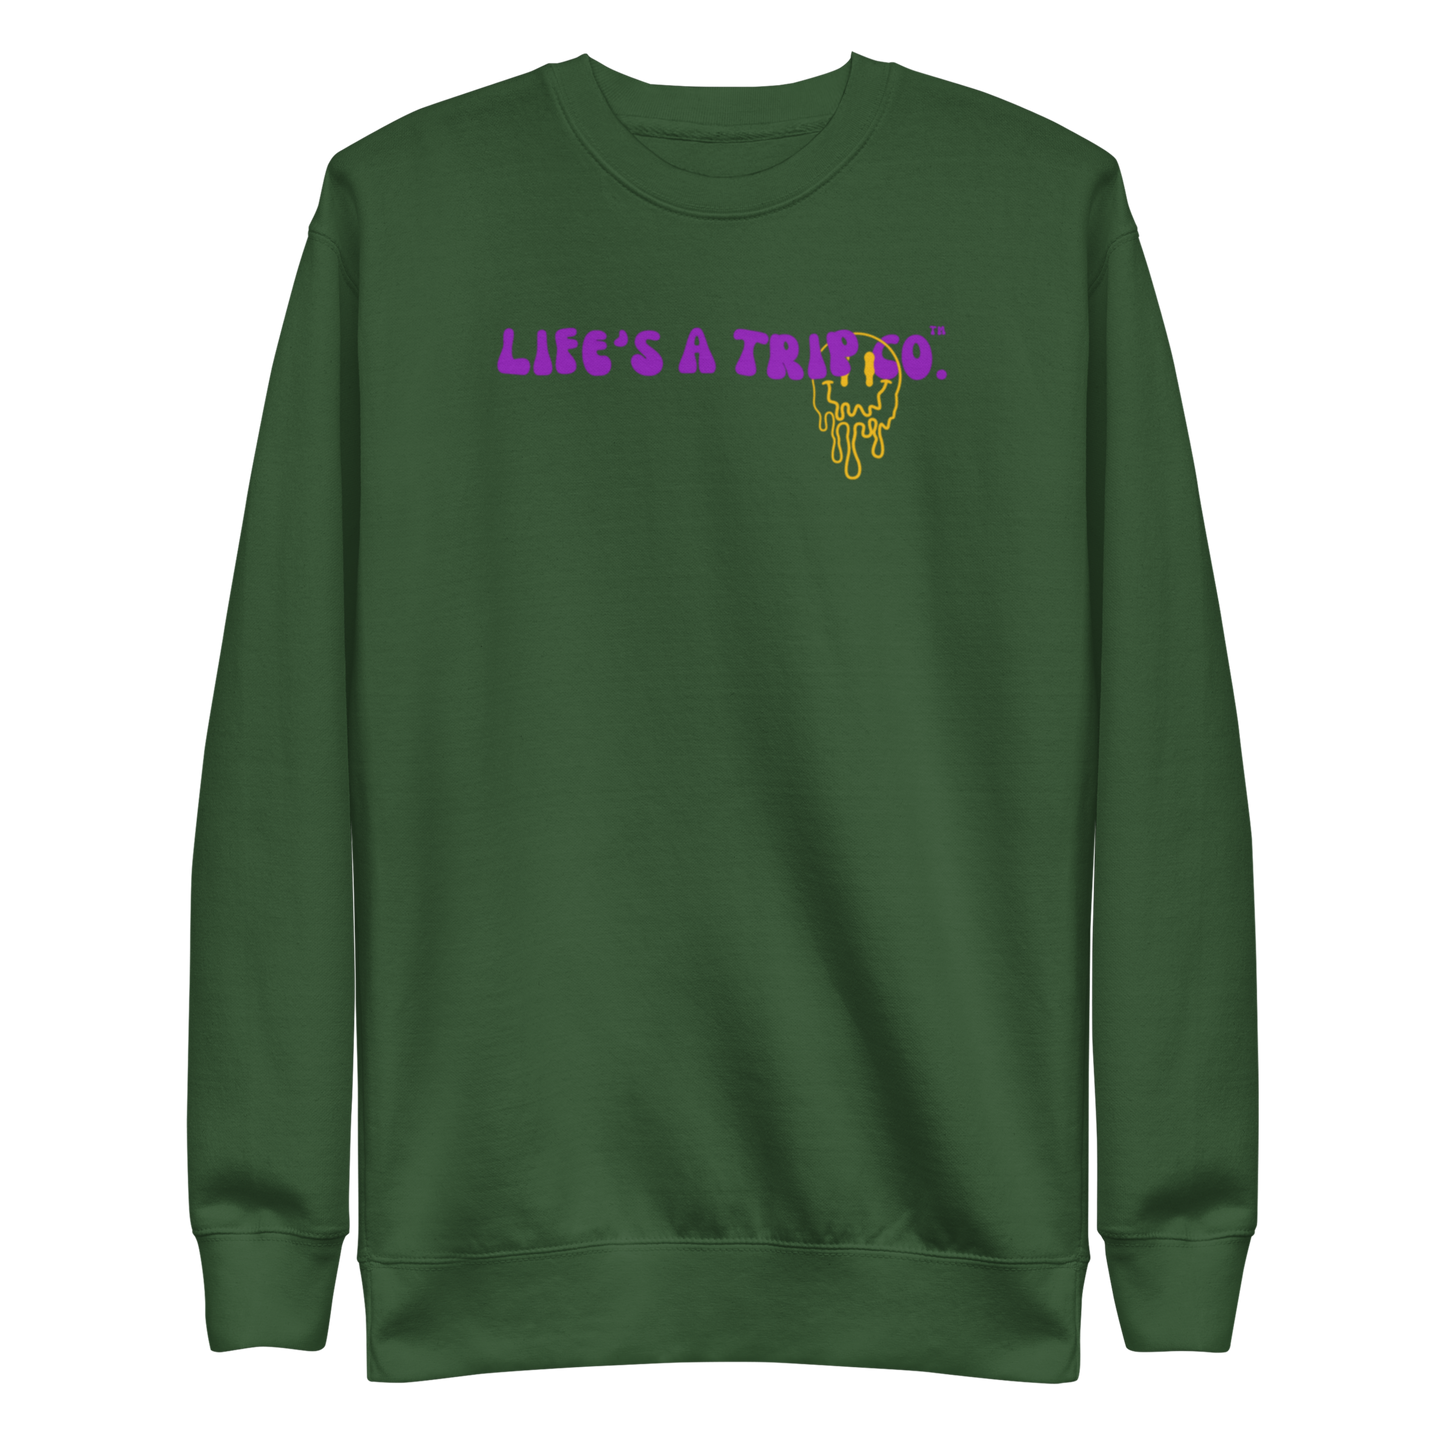 Life's a Trip Co.™ Happiness is a State of MInd Premium Sweatshirt | Cotton Heritage M2480